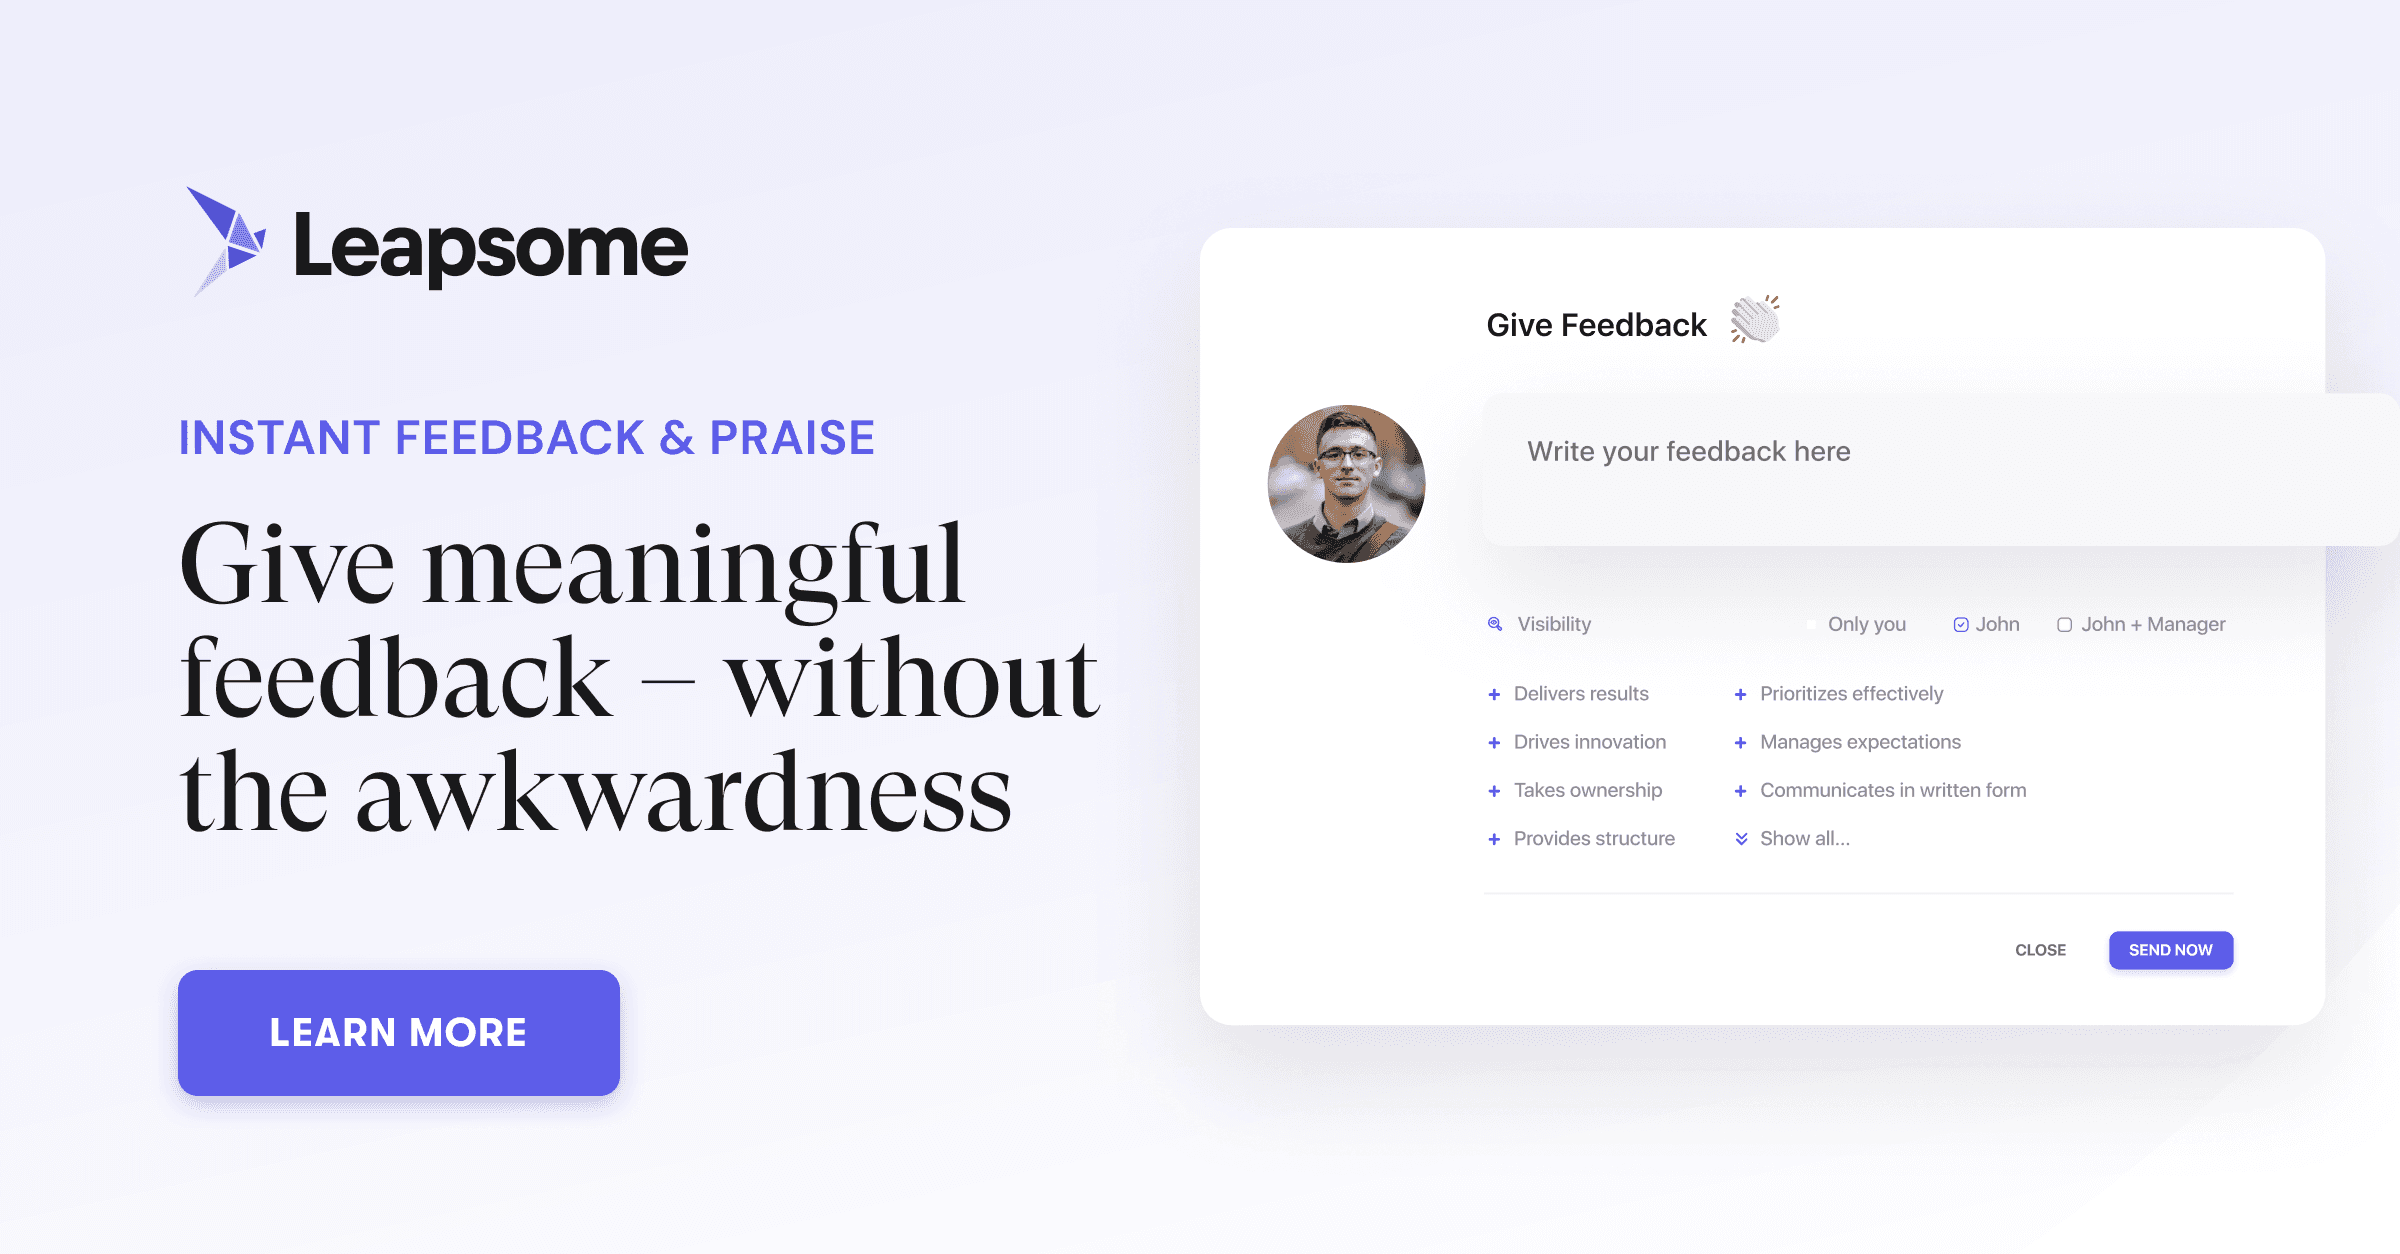 Product: Employee Feedback & Praise Software | Leapsome